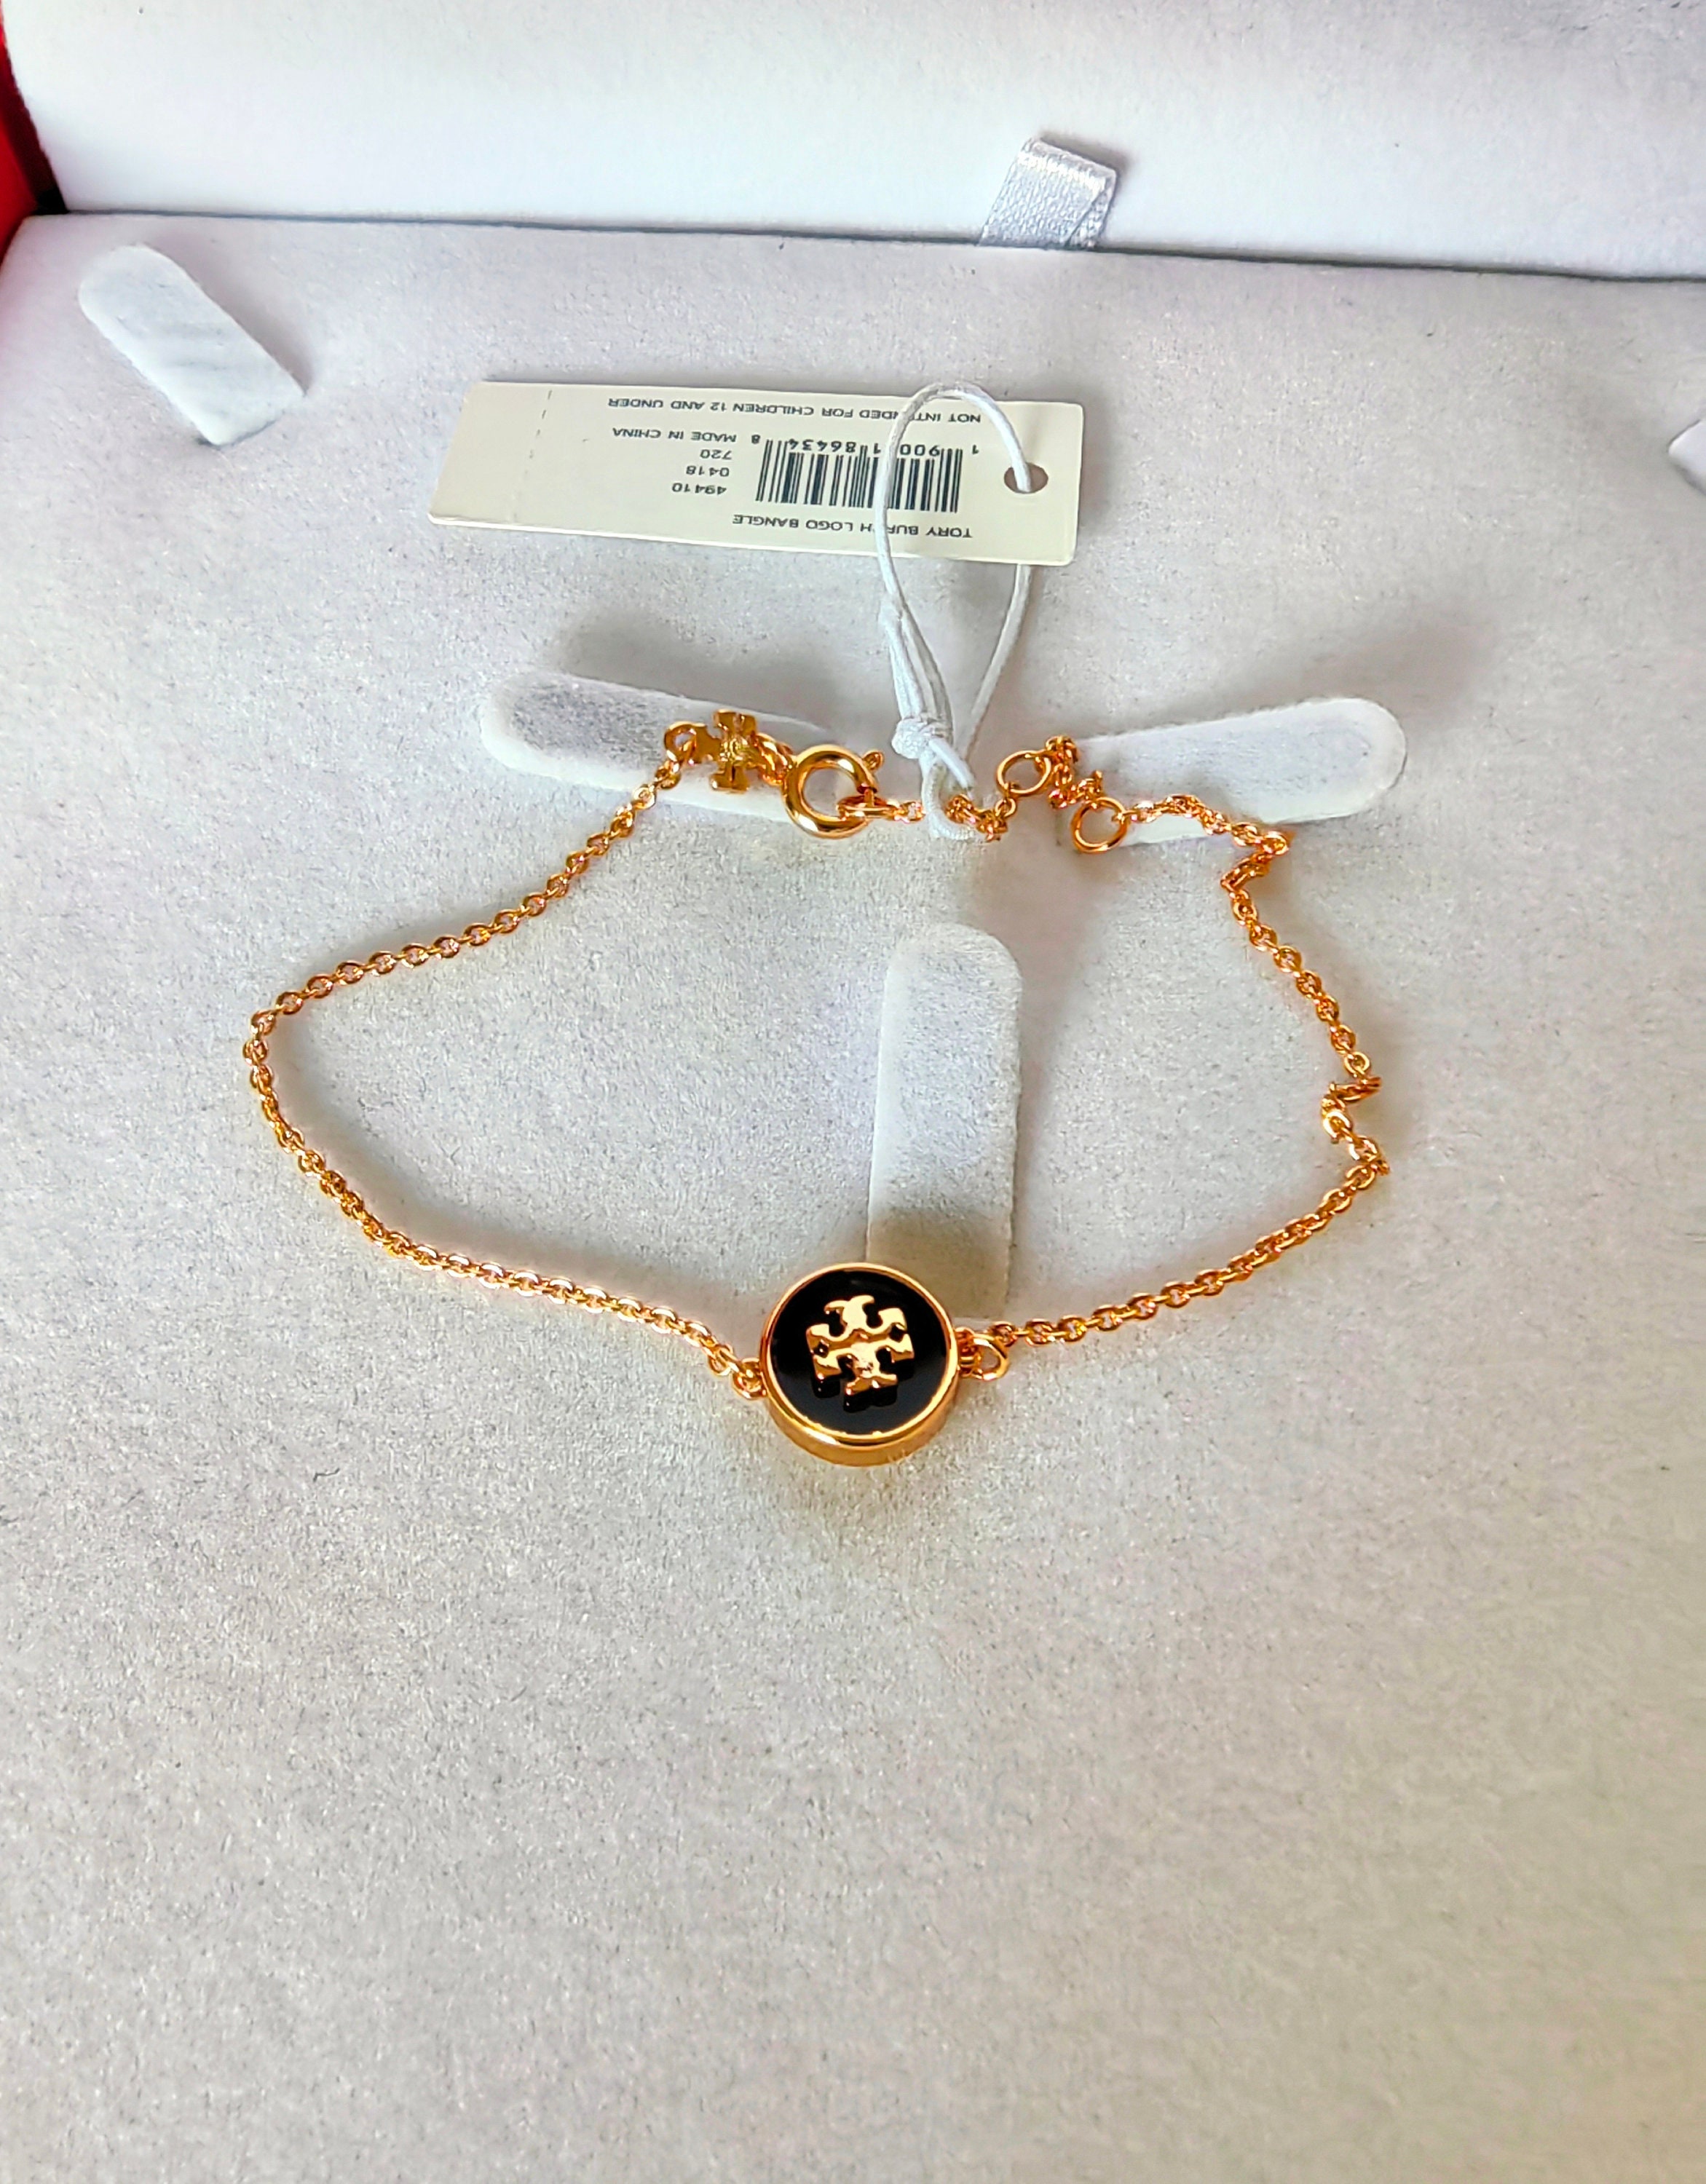 Tory Burch Necklace - Etsy